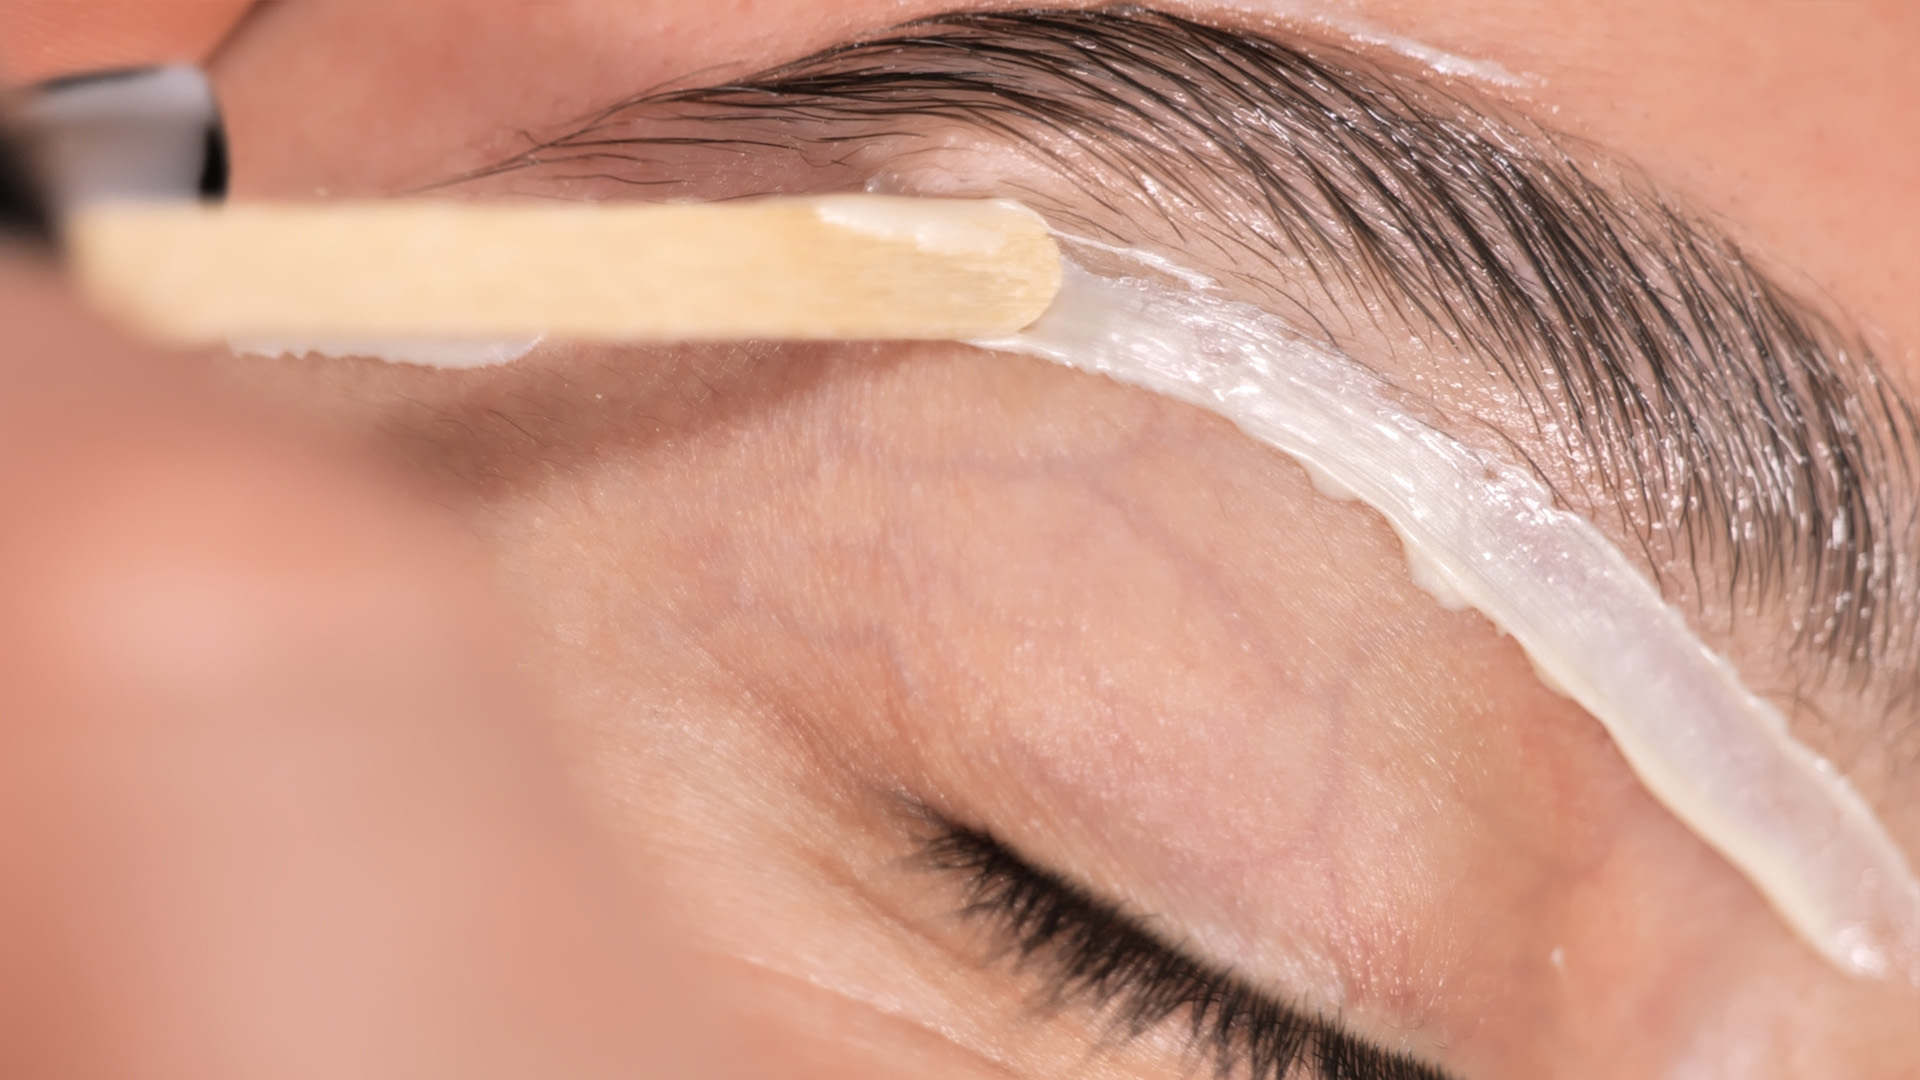 Eyebrow Shaping: Waxing vs Threading. Image of an eyebrow wax for our beauty blog post about brow waxing vs brow threading.